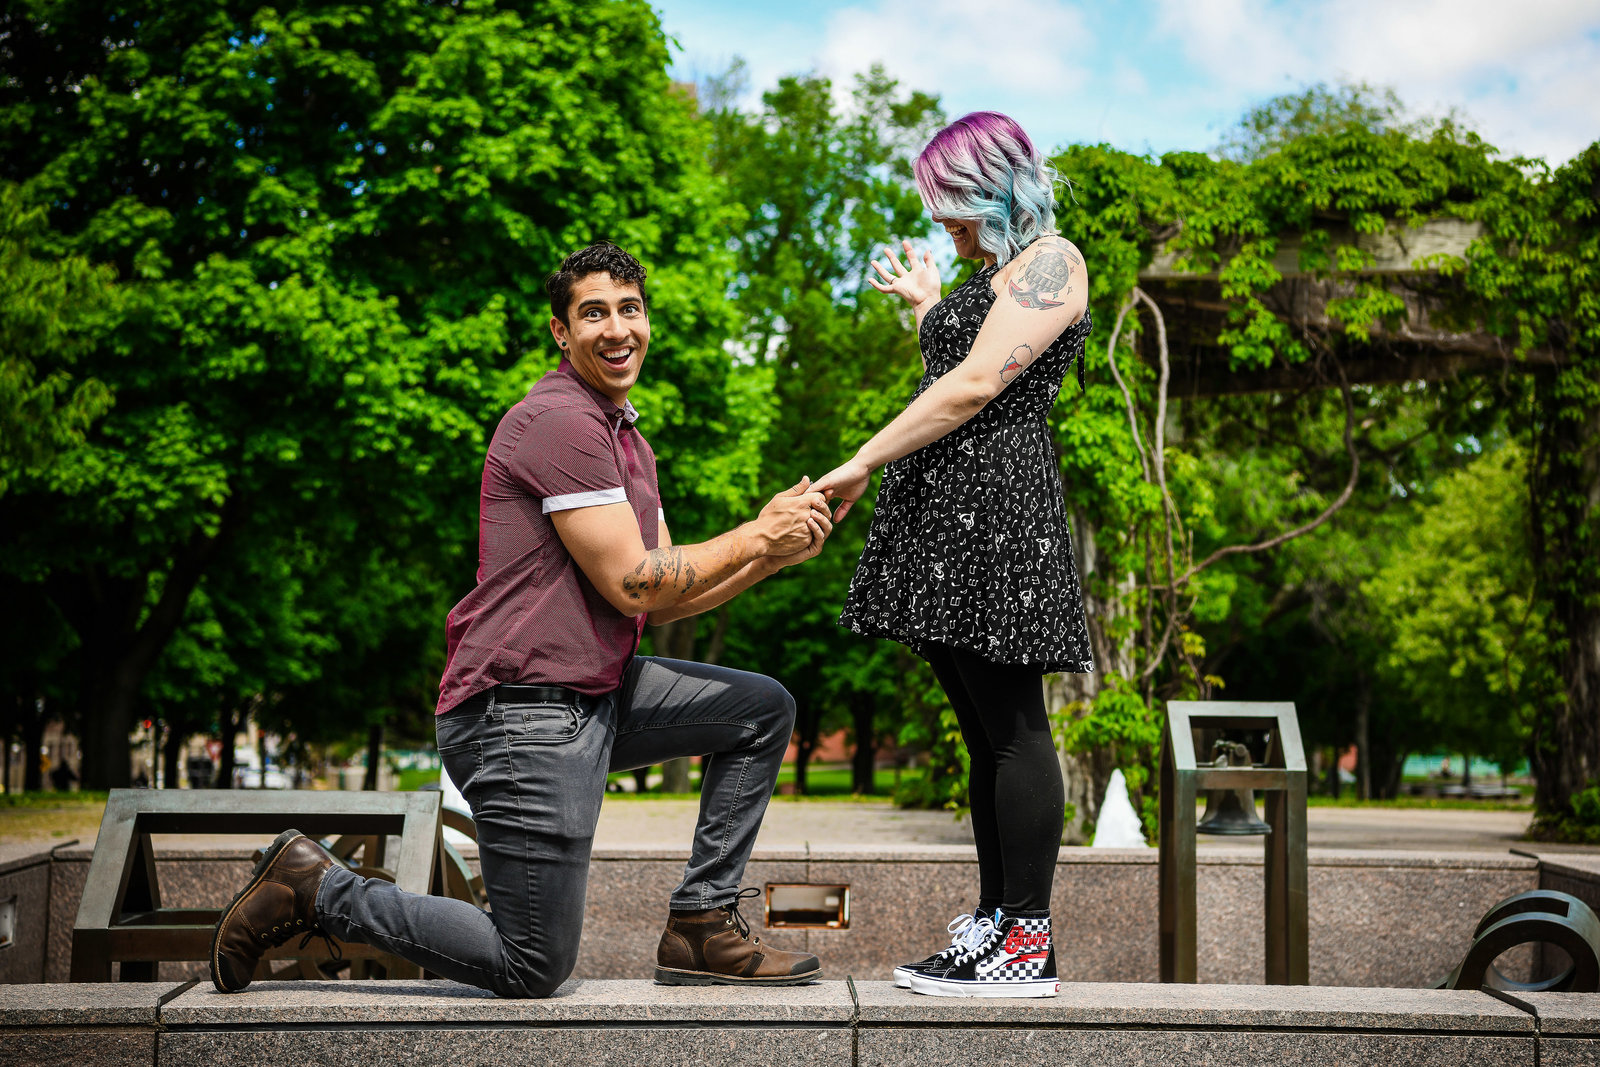 Man proposes to woman with rainbow hair and tattoos